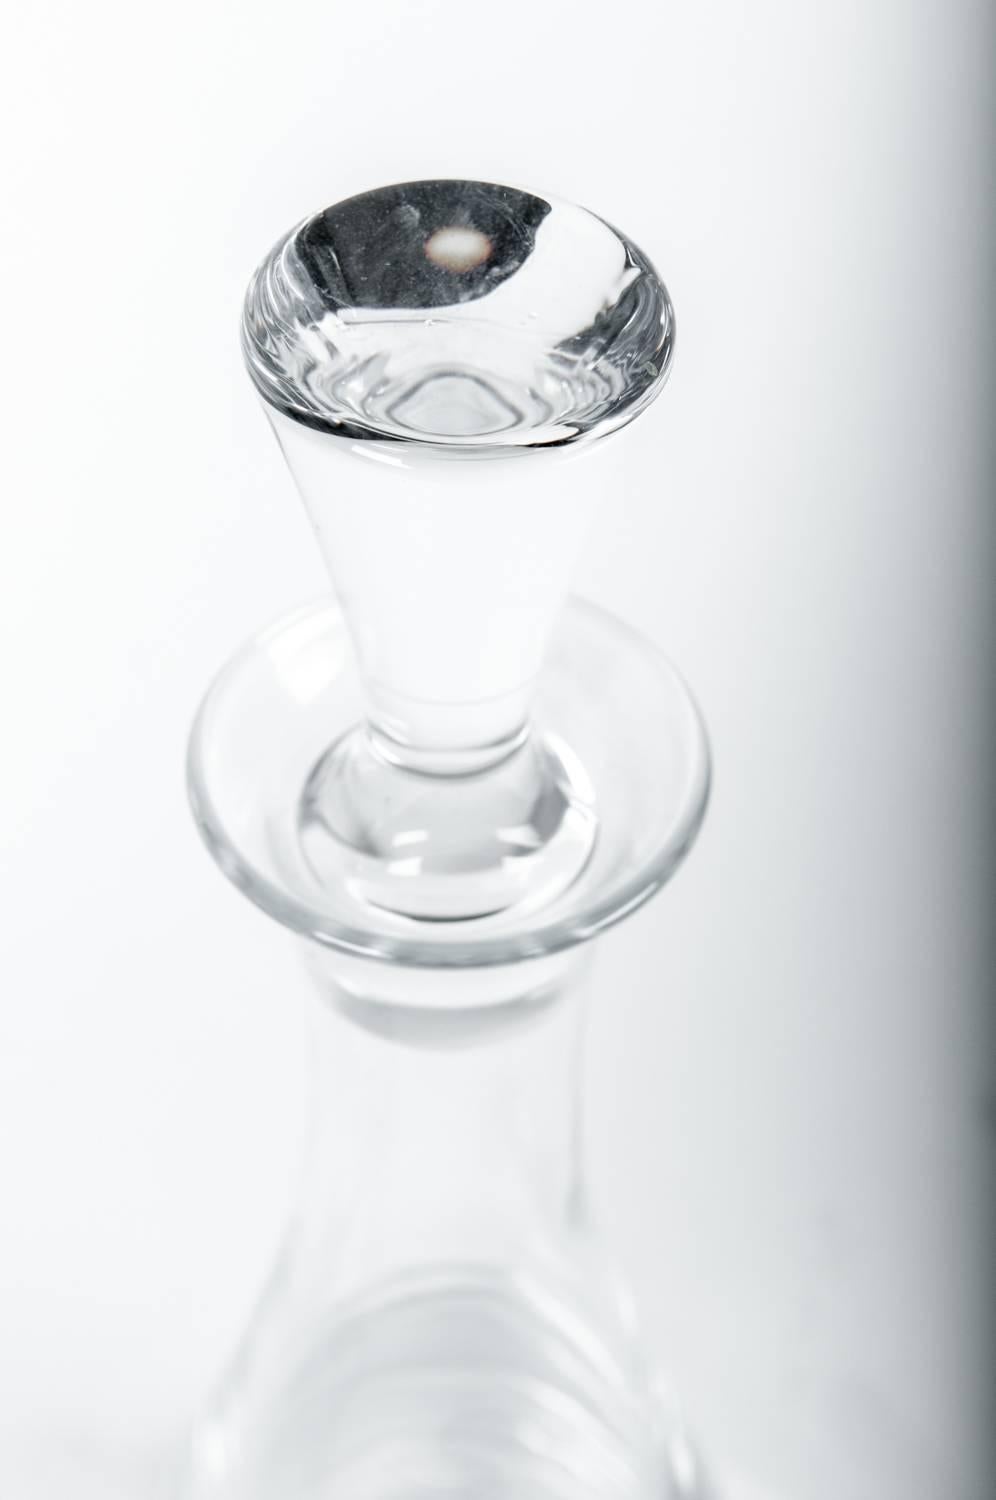 baccarat crystal decanters